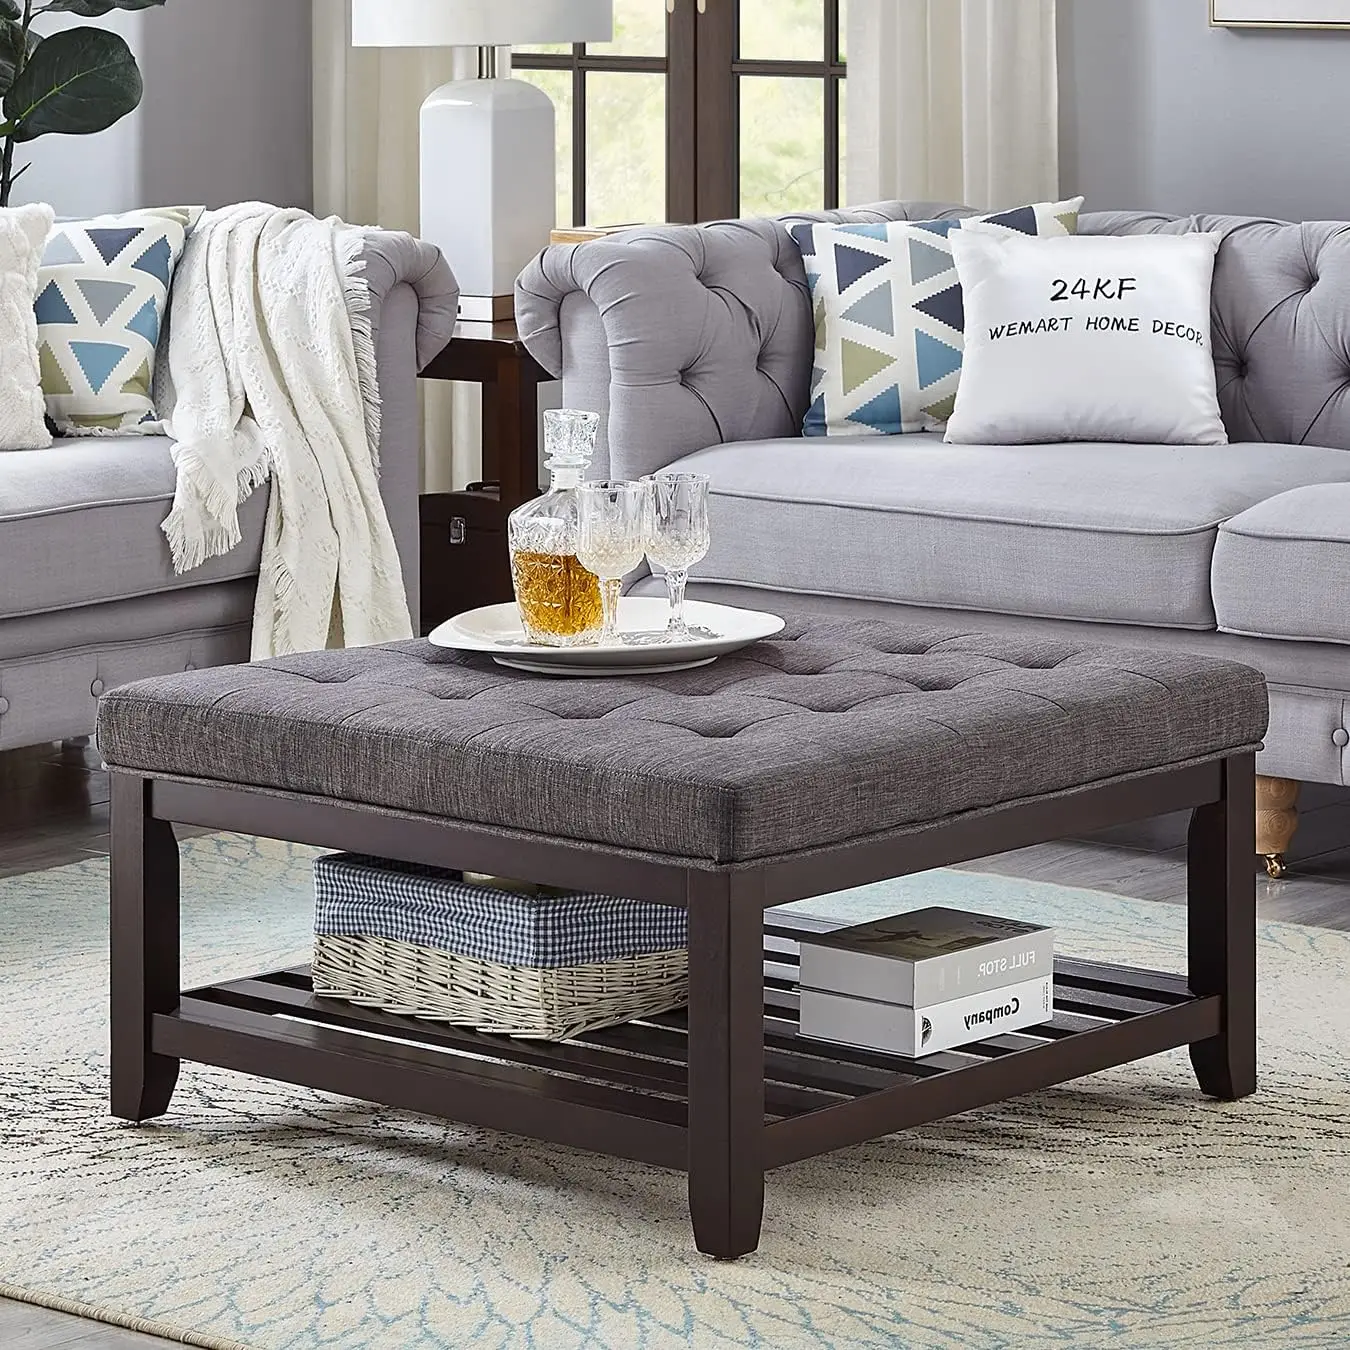 

24KF Large Square Upholstered Tufted Linen Ottoman Coffee Table, Large Footrest Ottoman with Solid Wood Shelf-Dark Gray